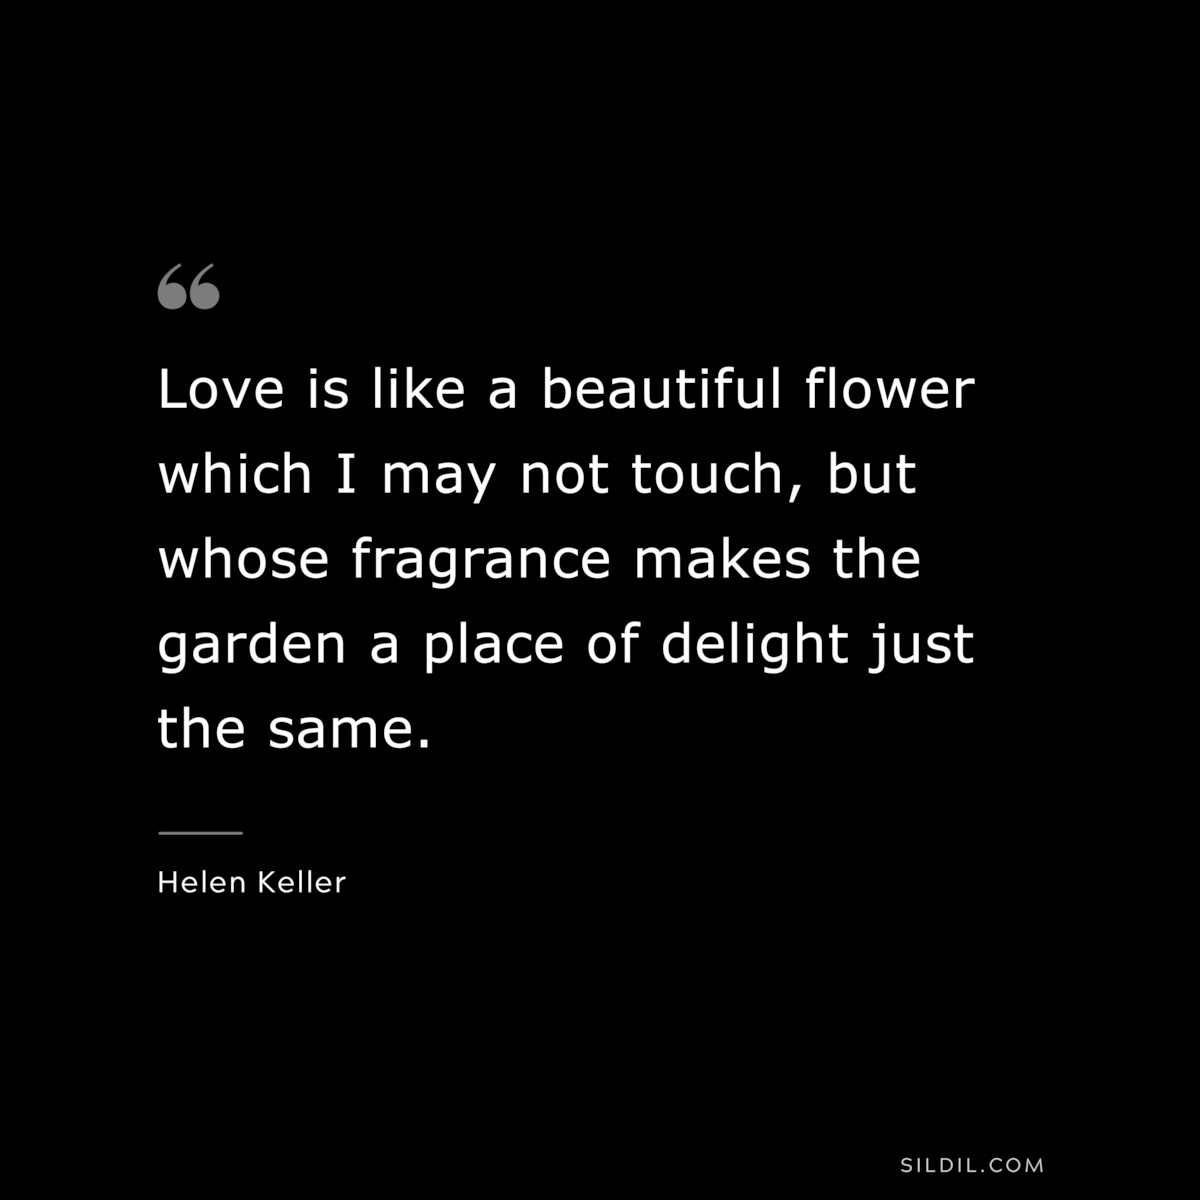 Love is like a beautiful flower which I may not touch, but whose fragrance makes the garden a place of delight just the same. ― Helen Keller